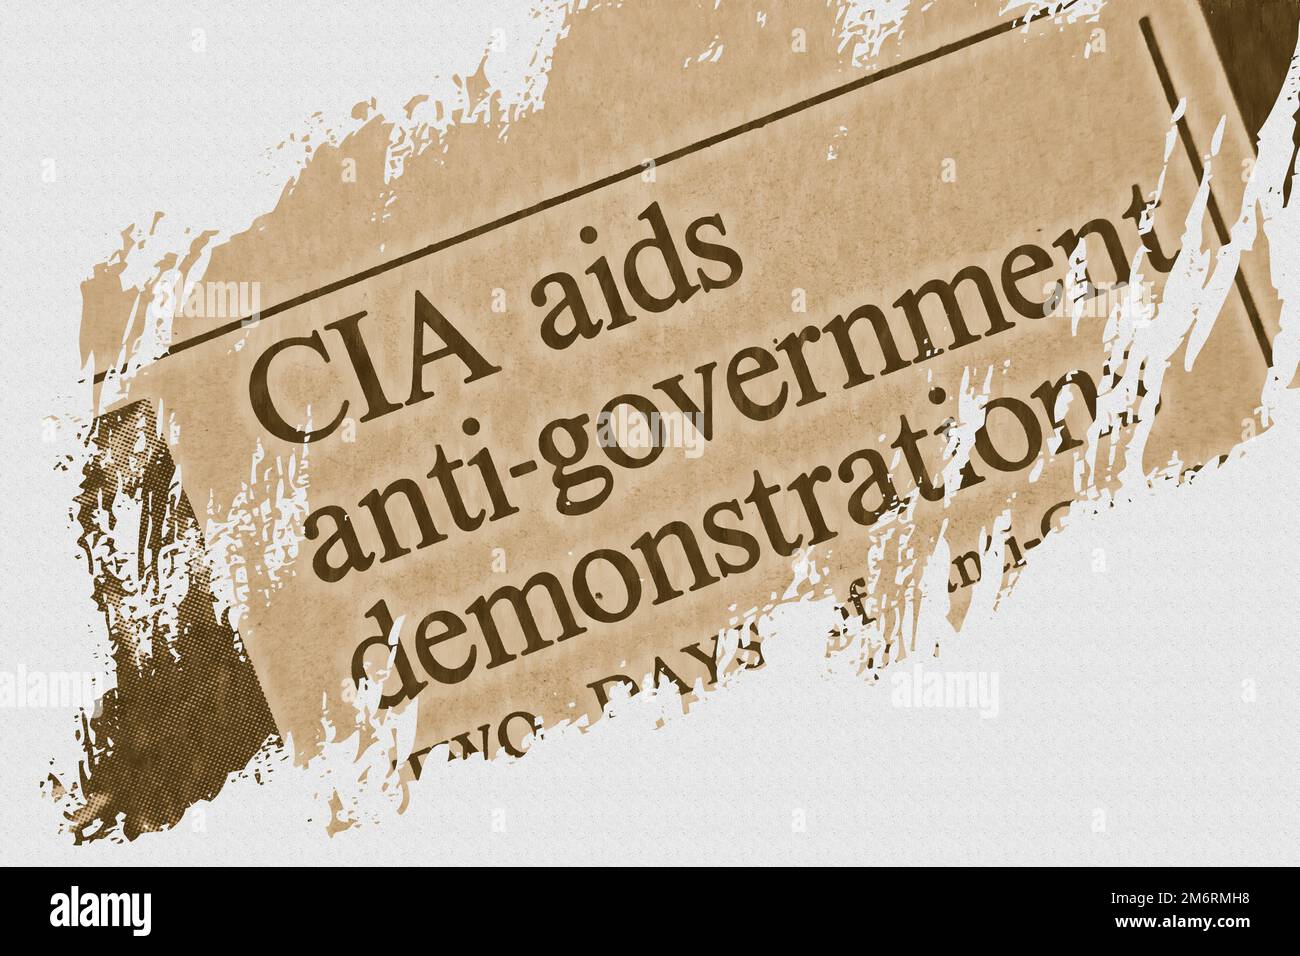 CIA aids anti-government demonstrations - news story from 1975 newspaper headline article title with overlay highlight Stock Photo